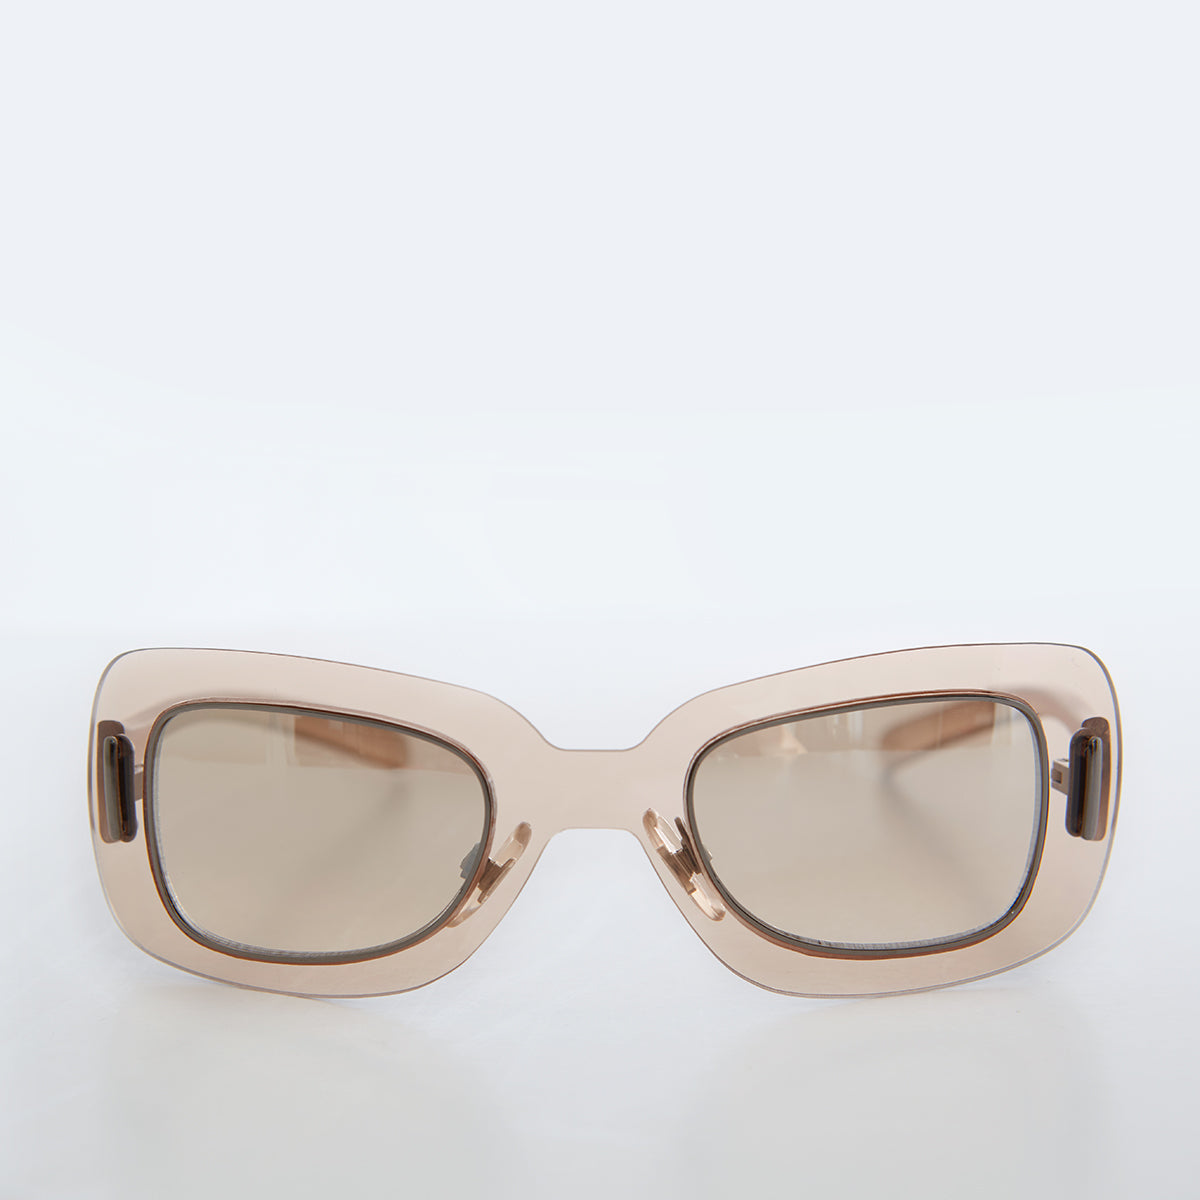 Curved Futuristic Vintage Sunglasses with Mirror Lens 